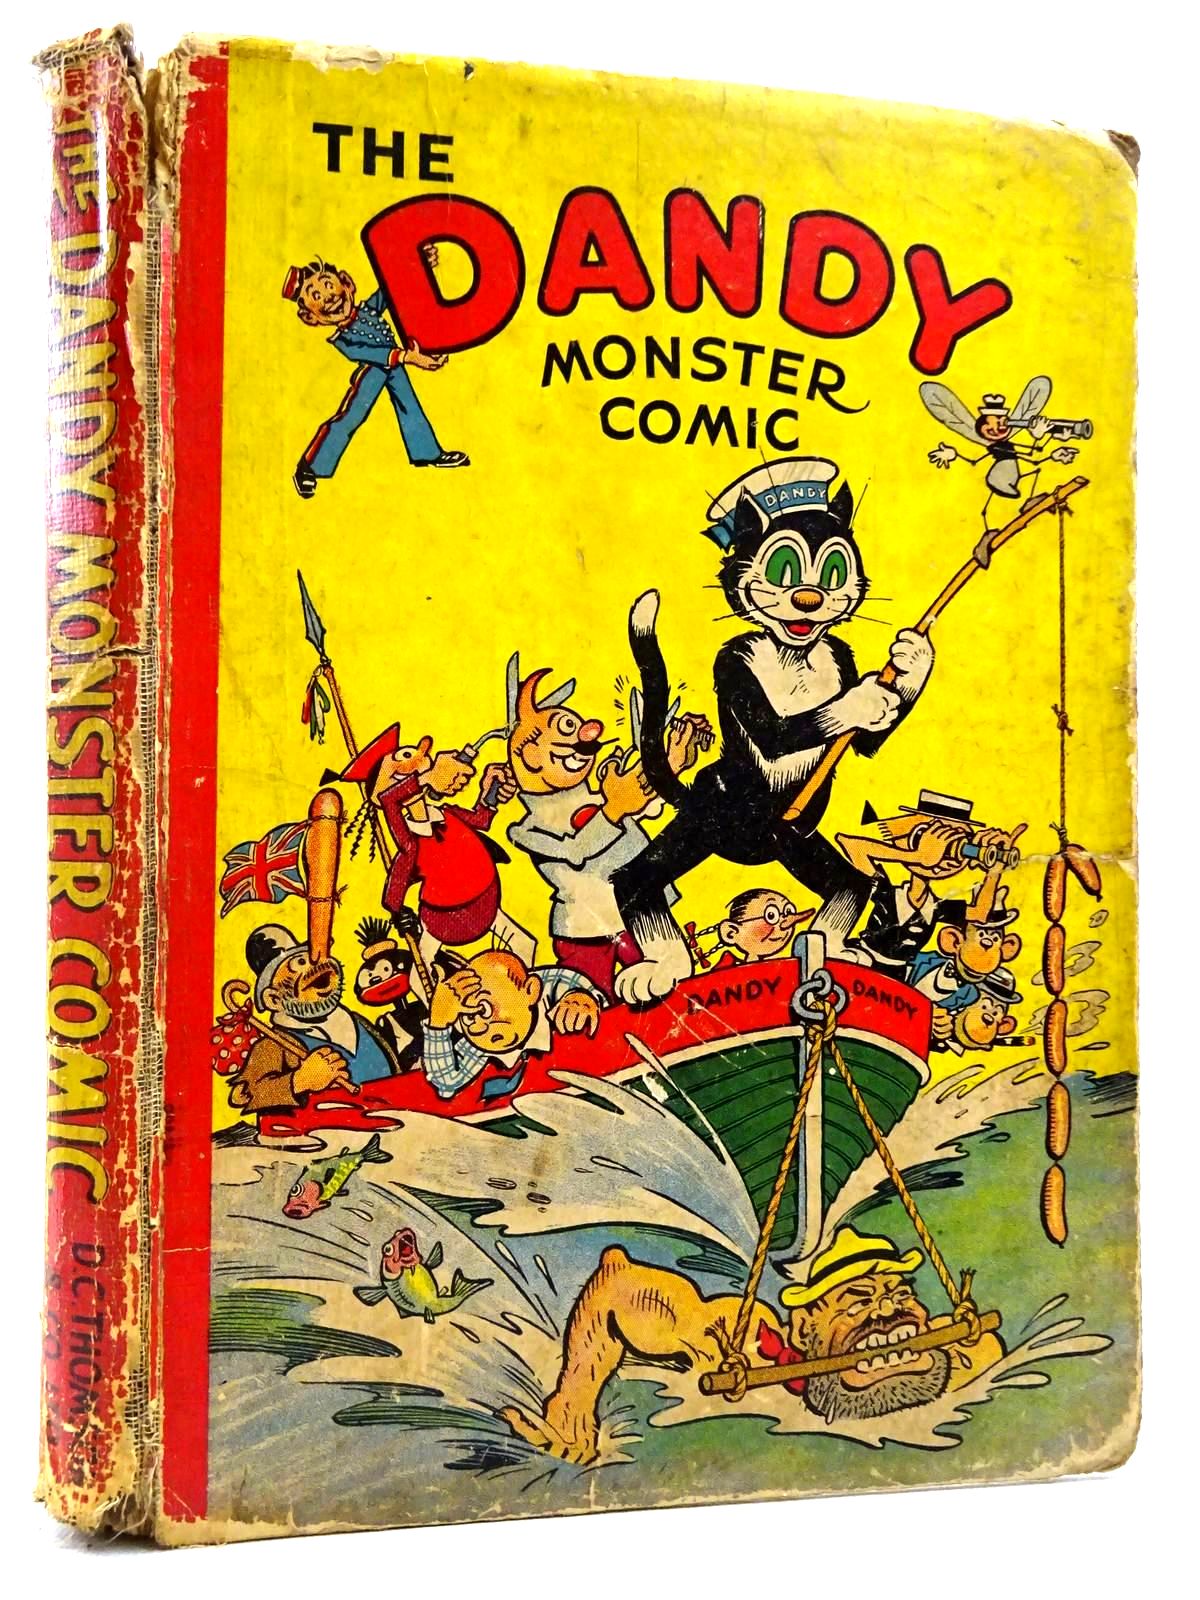 Photo of THE DANDY MONSTER COMIC 1942 published by D.C. Thomson &amp; Co Ltd. (STOCK CODE: 2129020)  for sale by Stella & Rose's Books